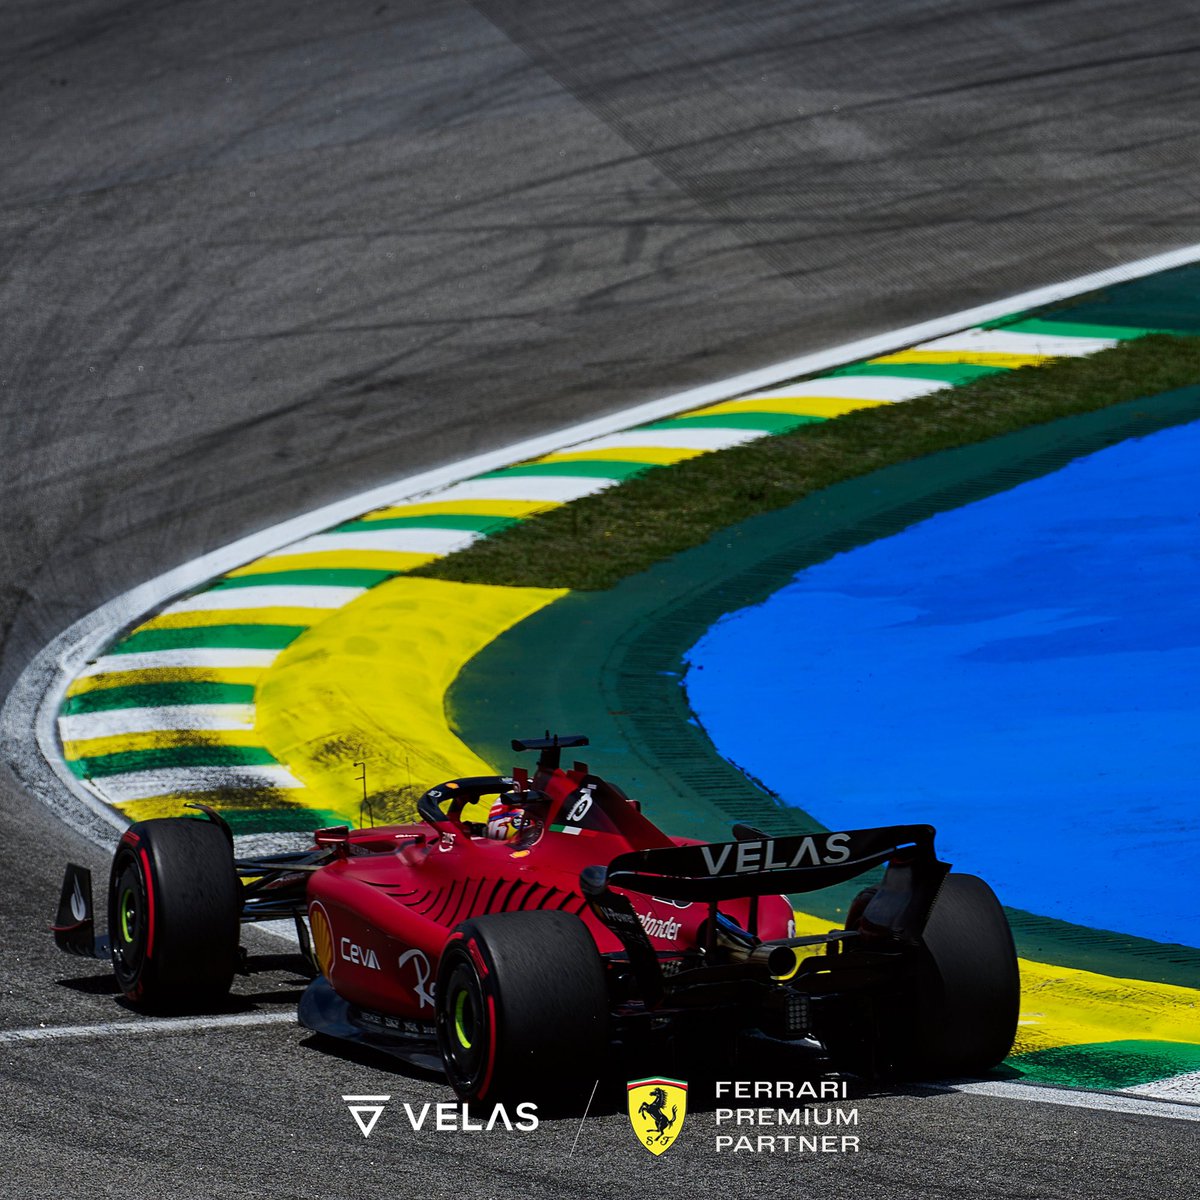 That's P2 for @carlossainz55 in a manic #BrazilGP #F1Sprint, and @charles_leclerc not far behind in P6! Despite a grid penalty for Carlos which sets him back to P7, moving Charles to P5, there’s all to play for in tomorrow’s race. Forza Ferrari, #FutureDriven #essereFerrari🔴